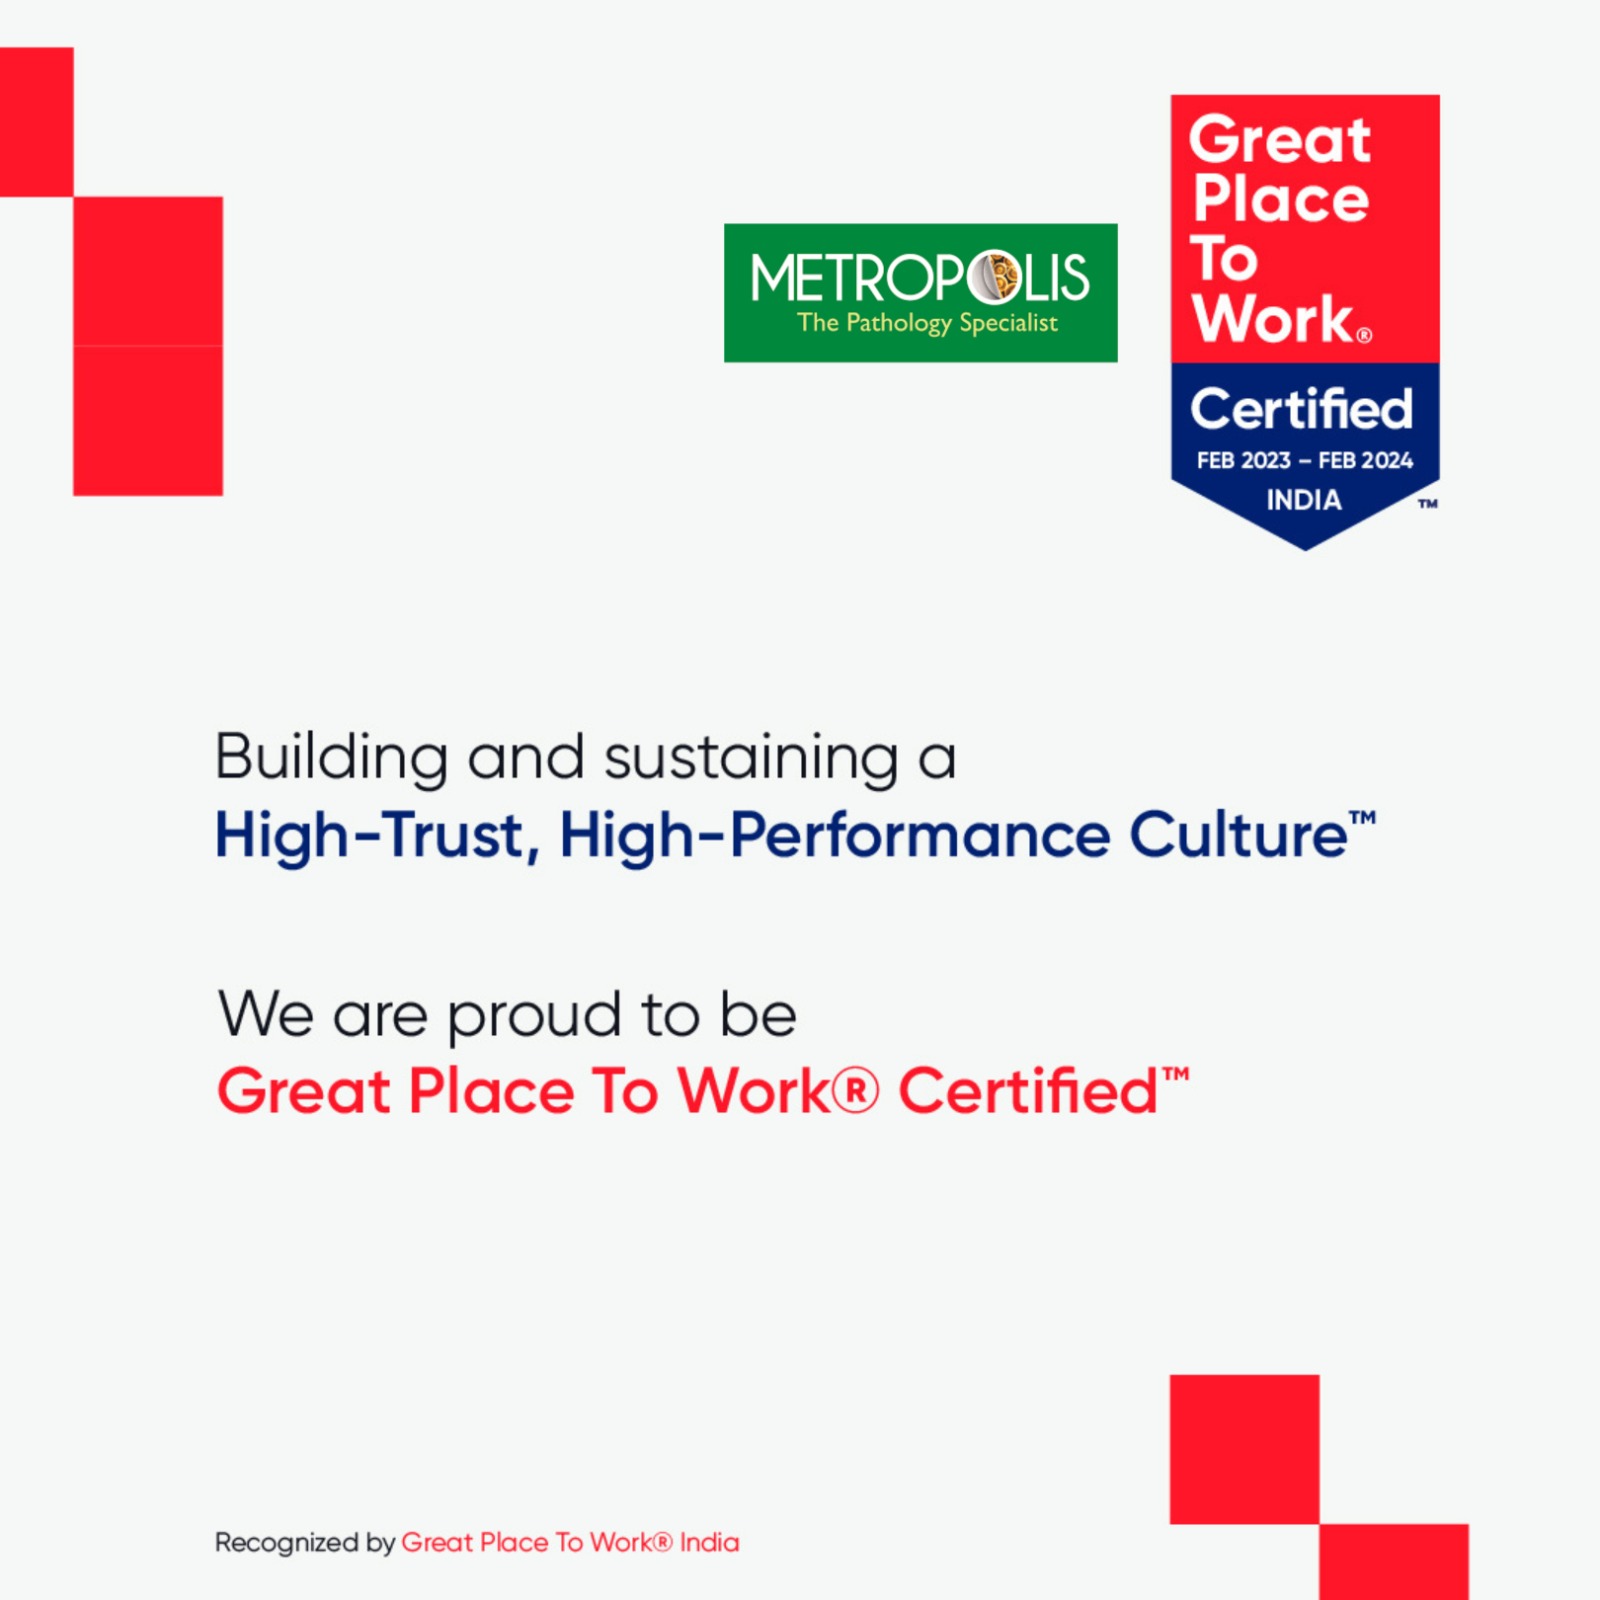 Metropolis recognized with the “Great Place to Work” certification for the year 2023-24